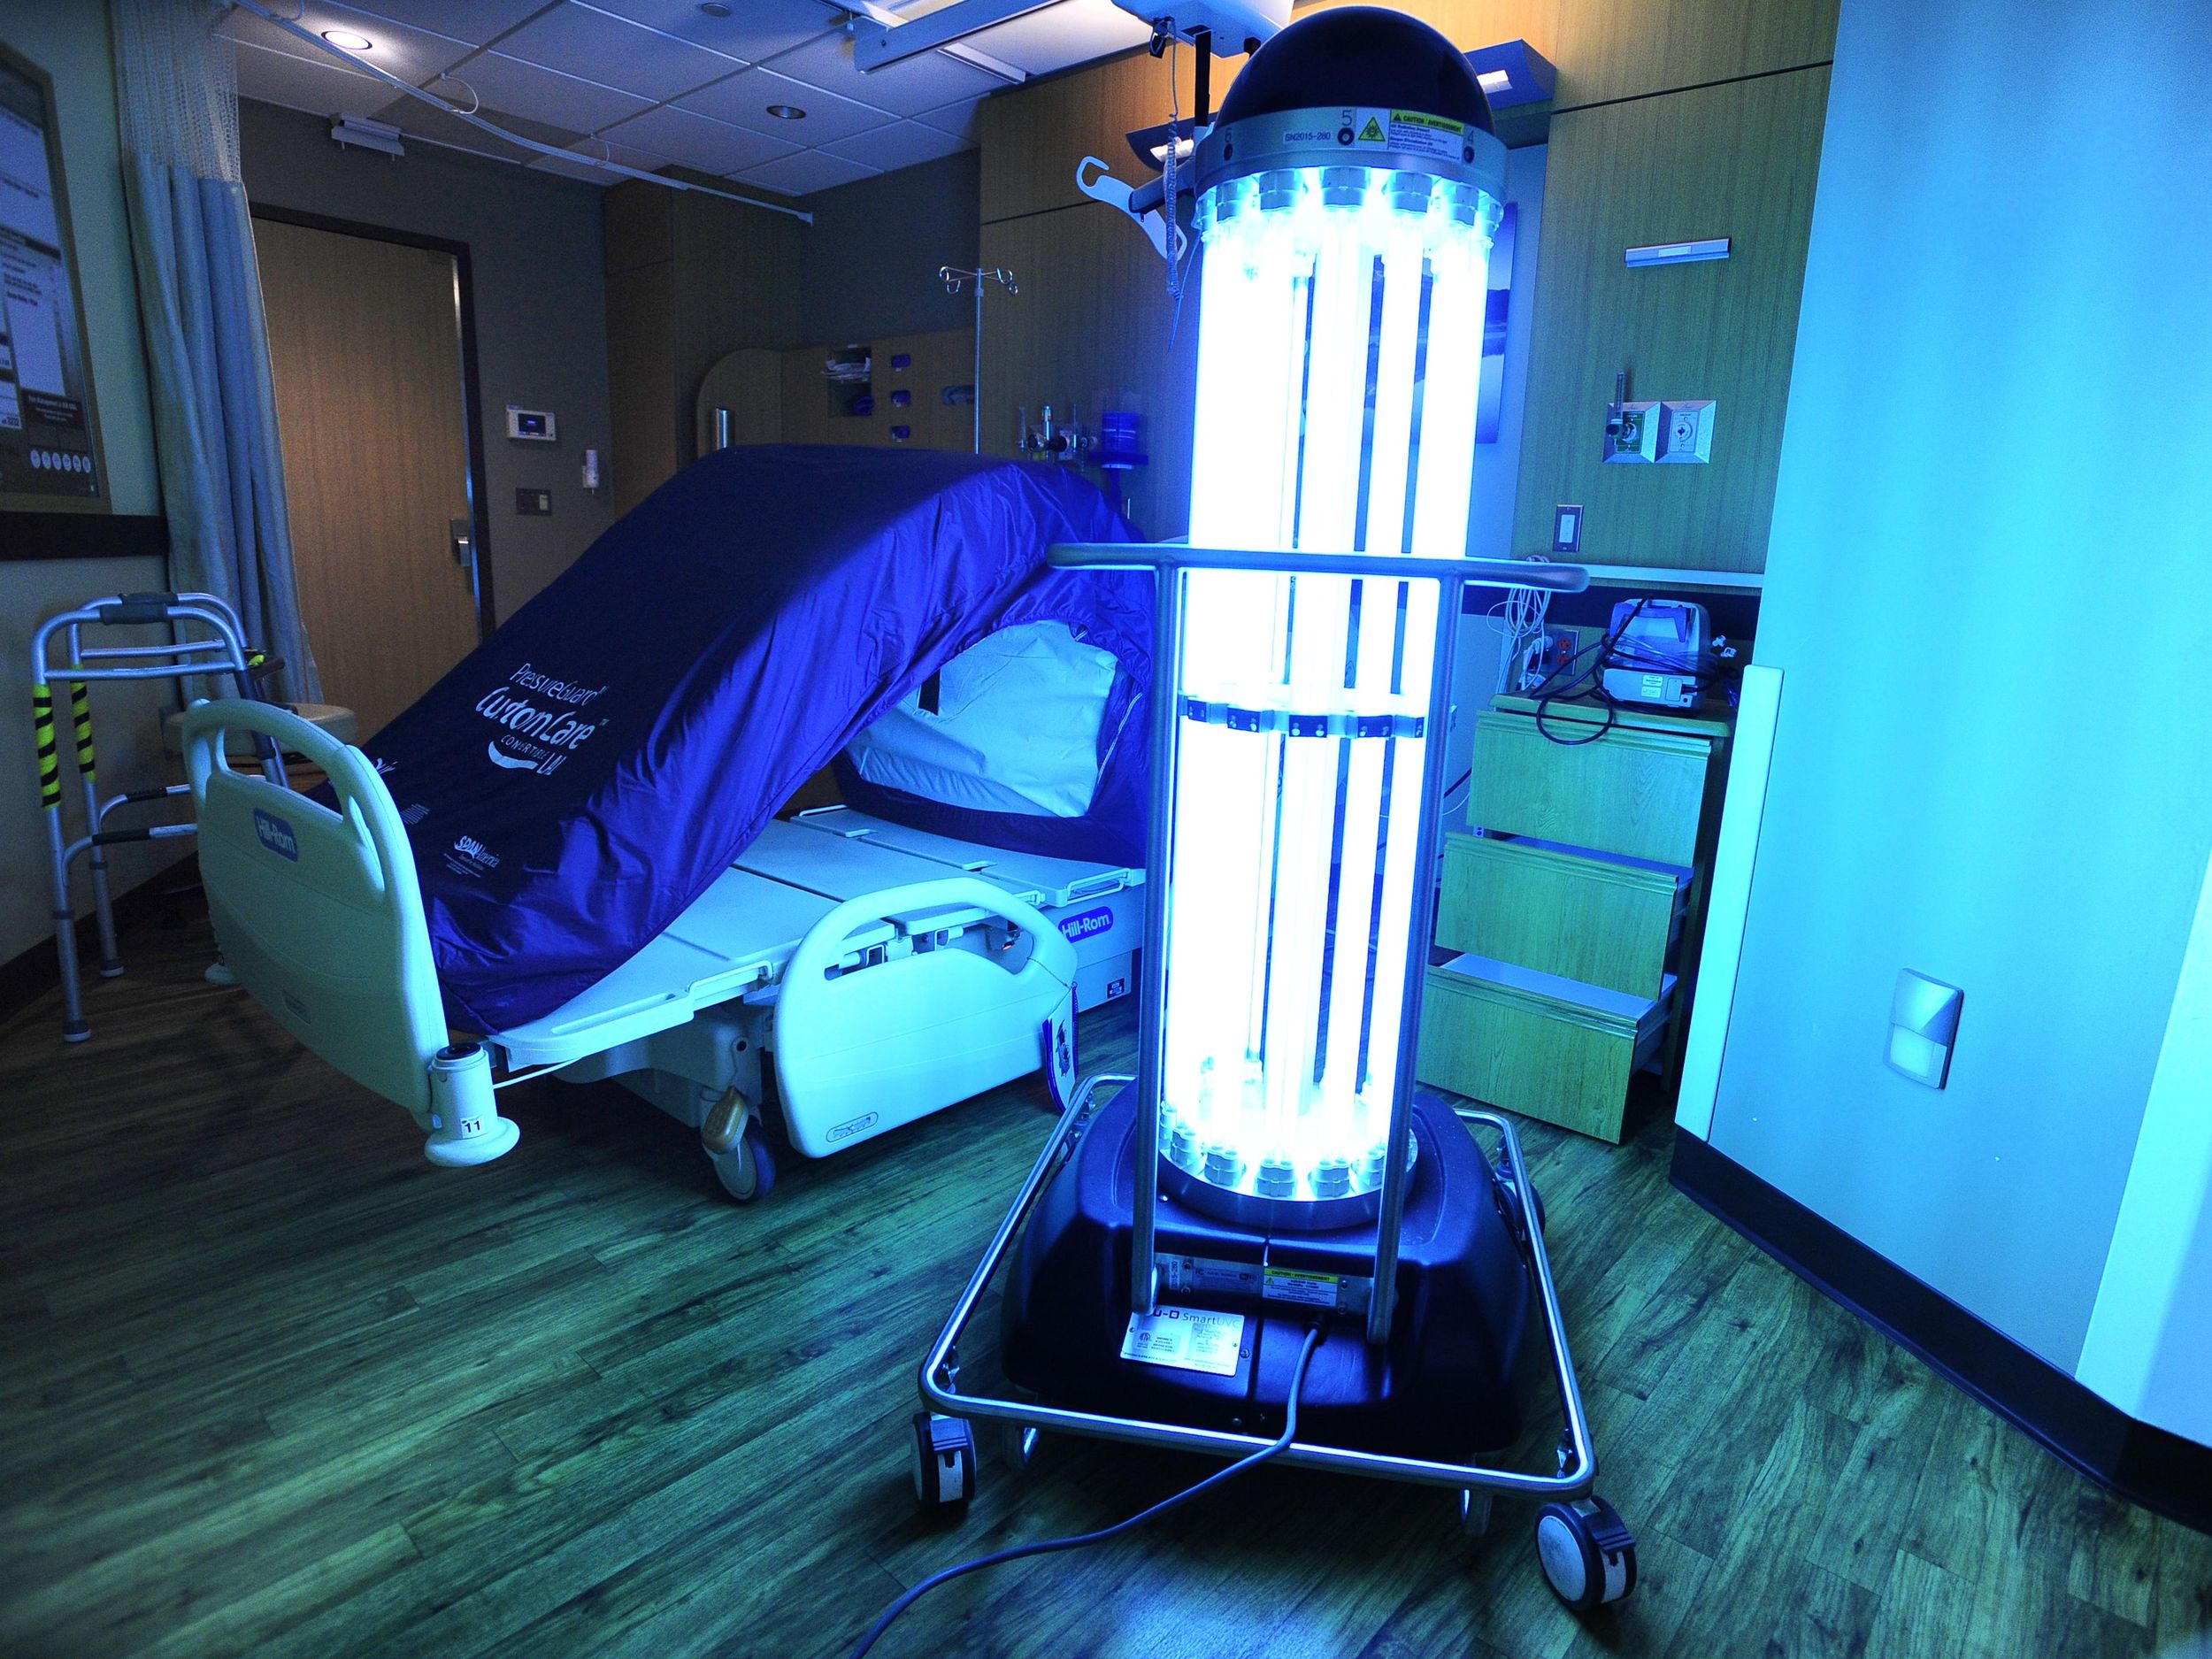 Bend hospital using ultraviolet light to kill germs | The Spokesman-Review